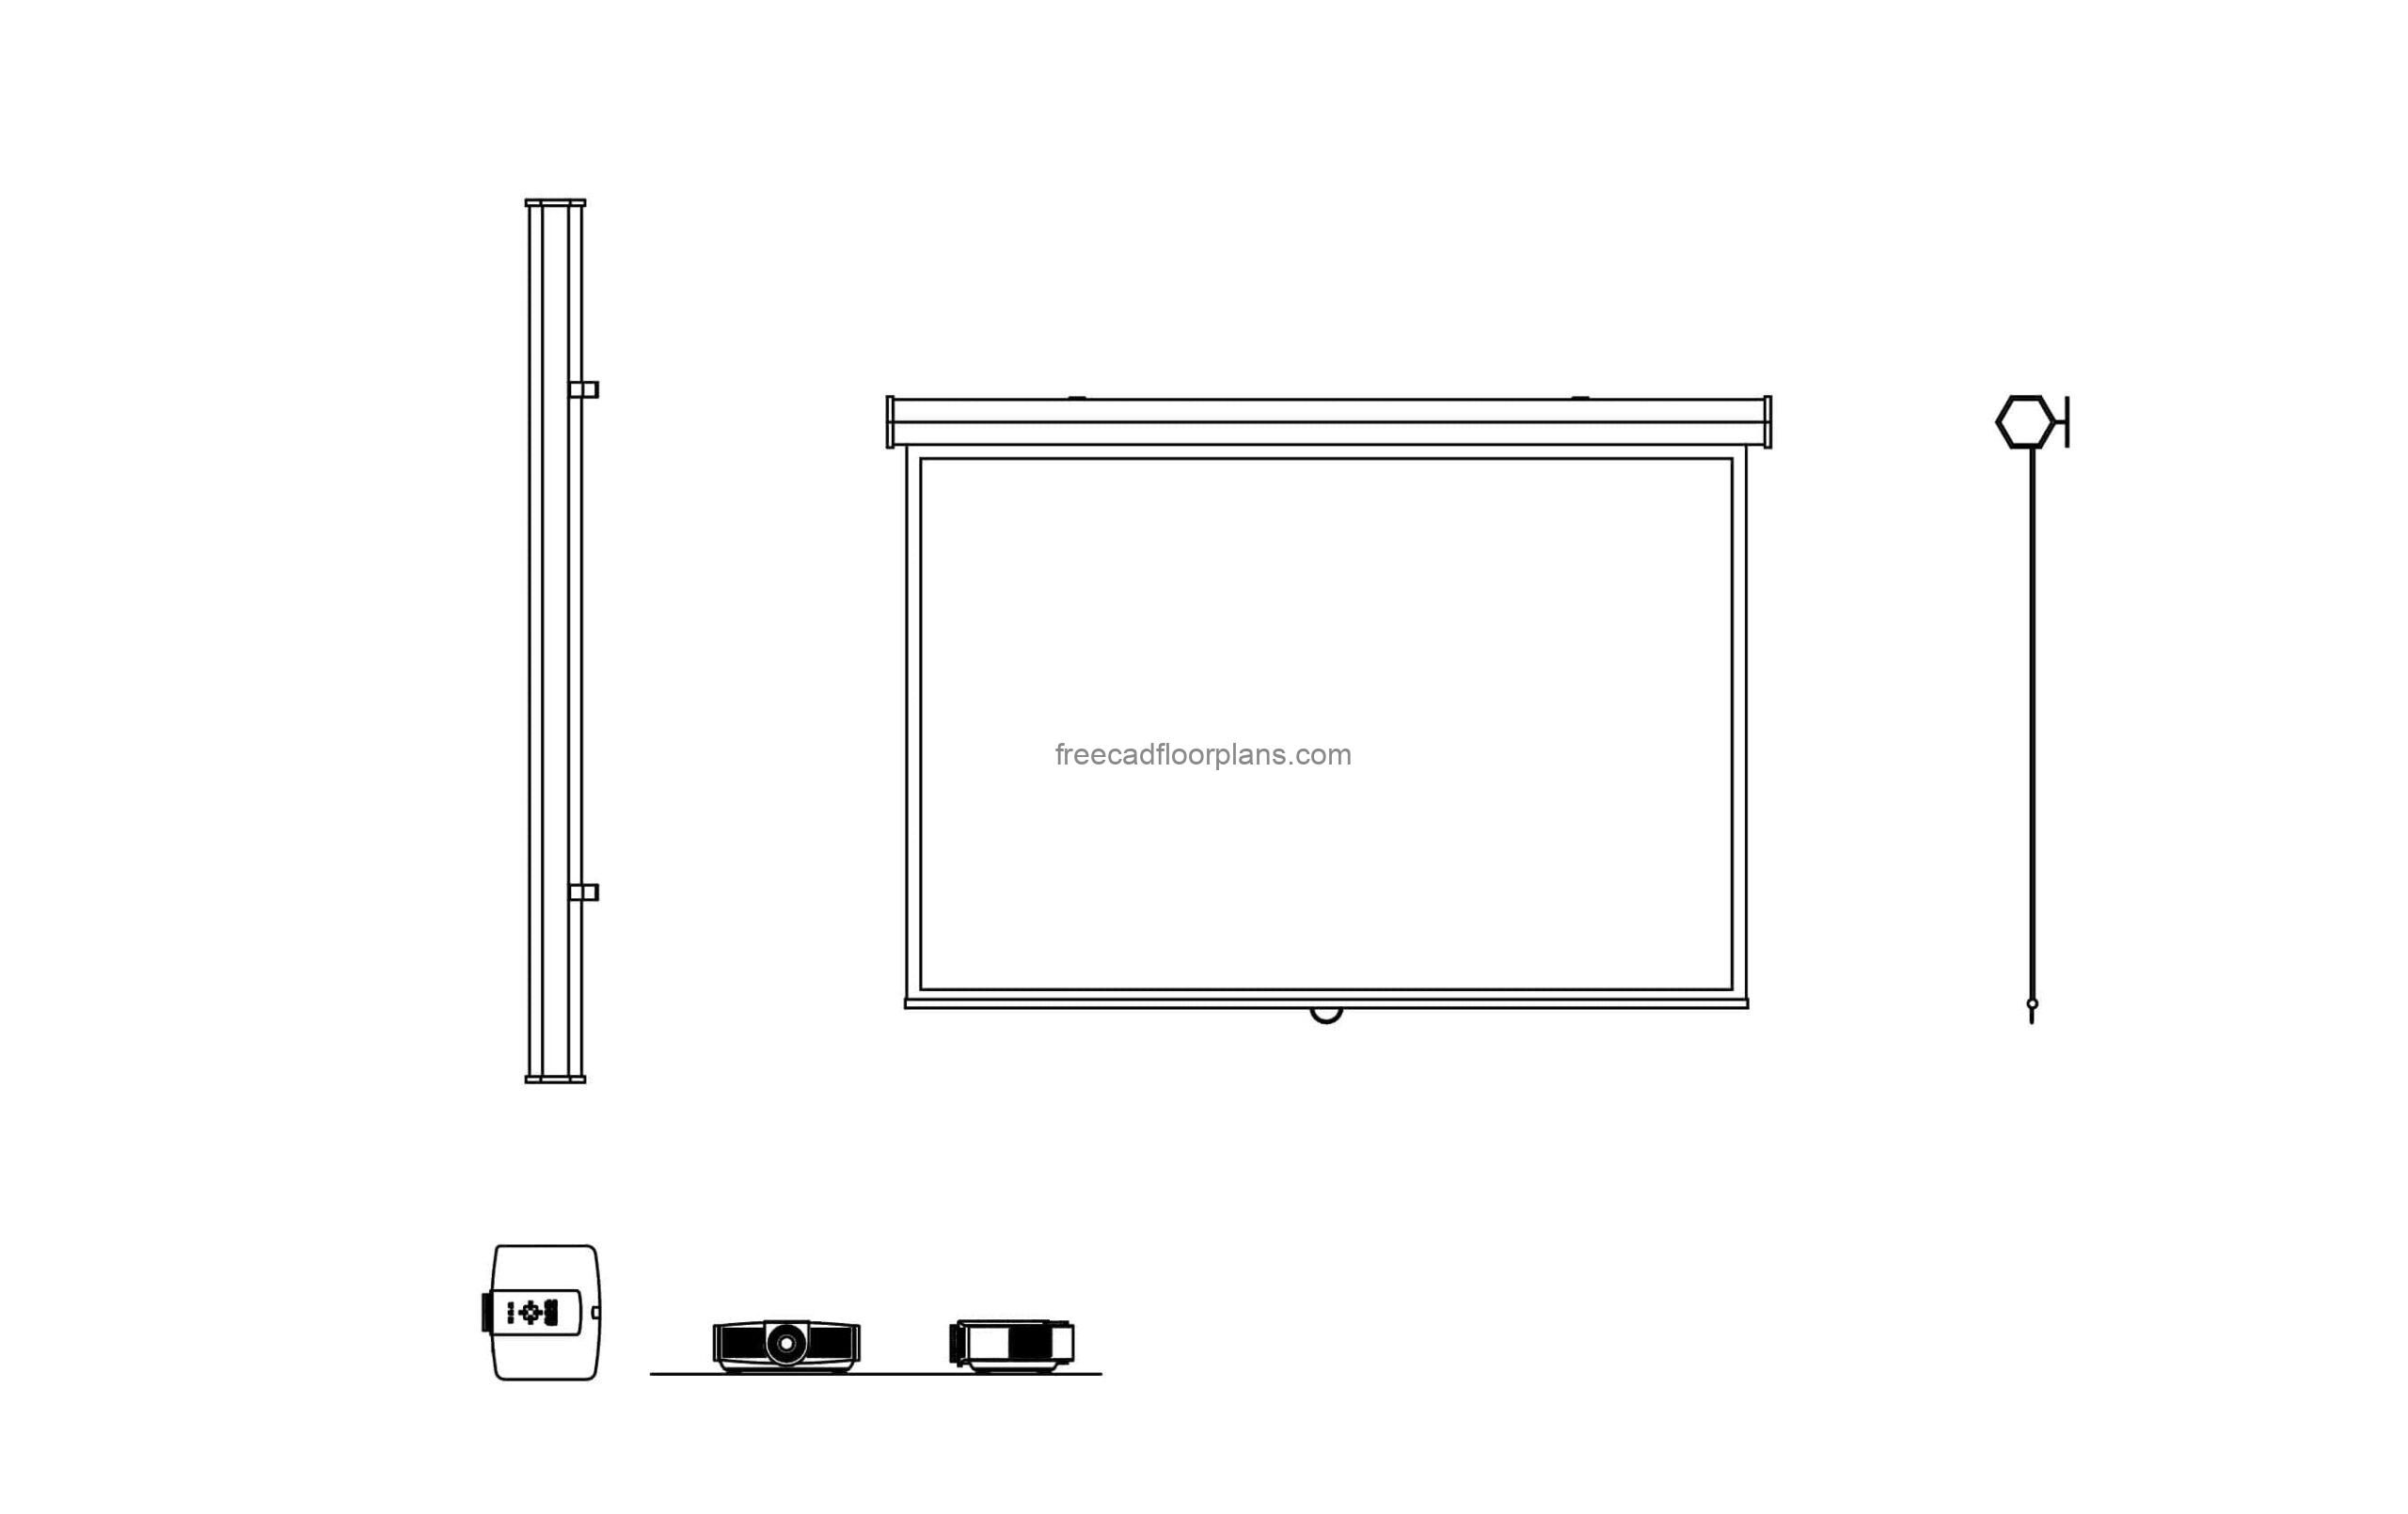 drawing of projector screen and projector equipment in dwg format cad block for free download